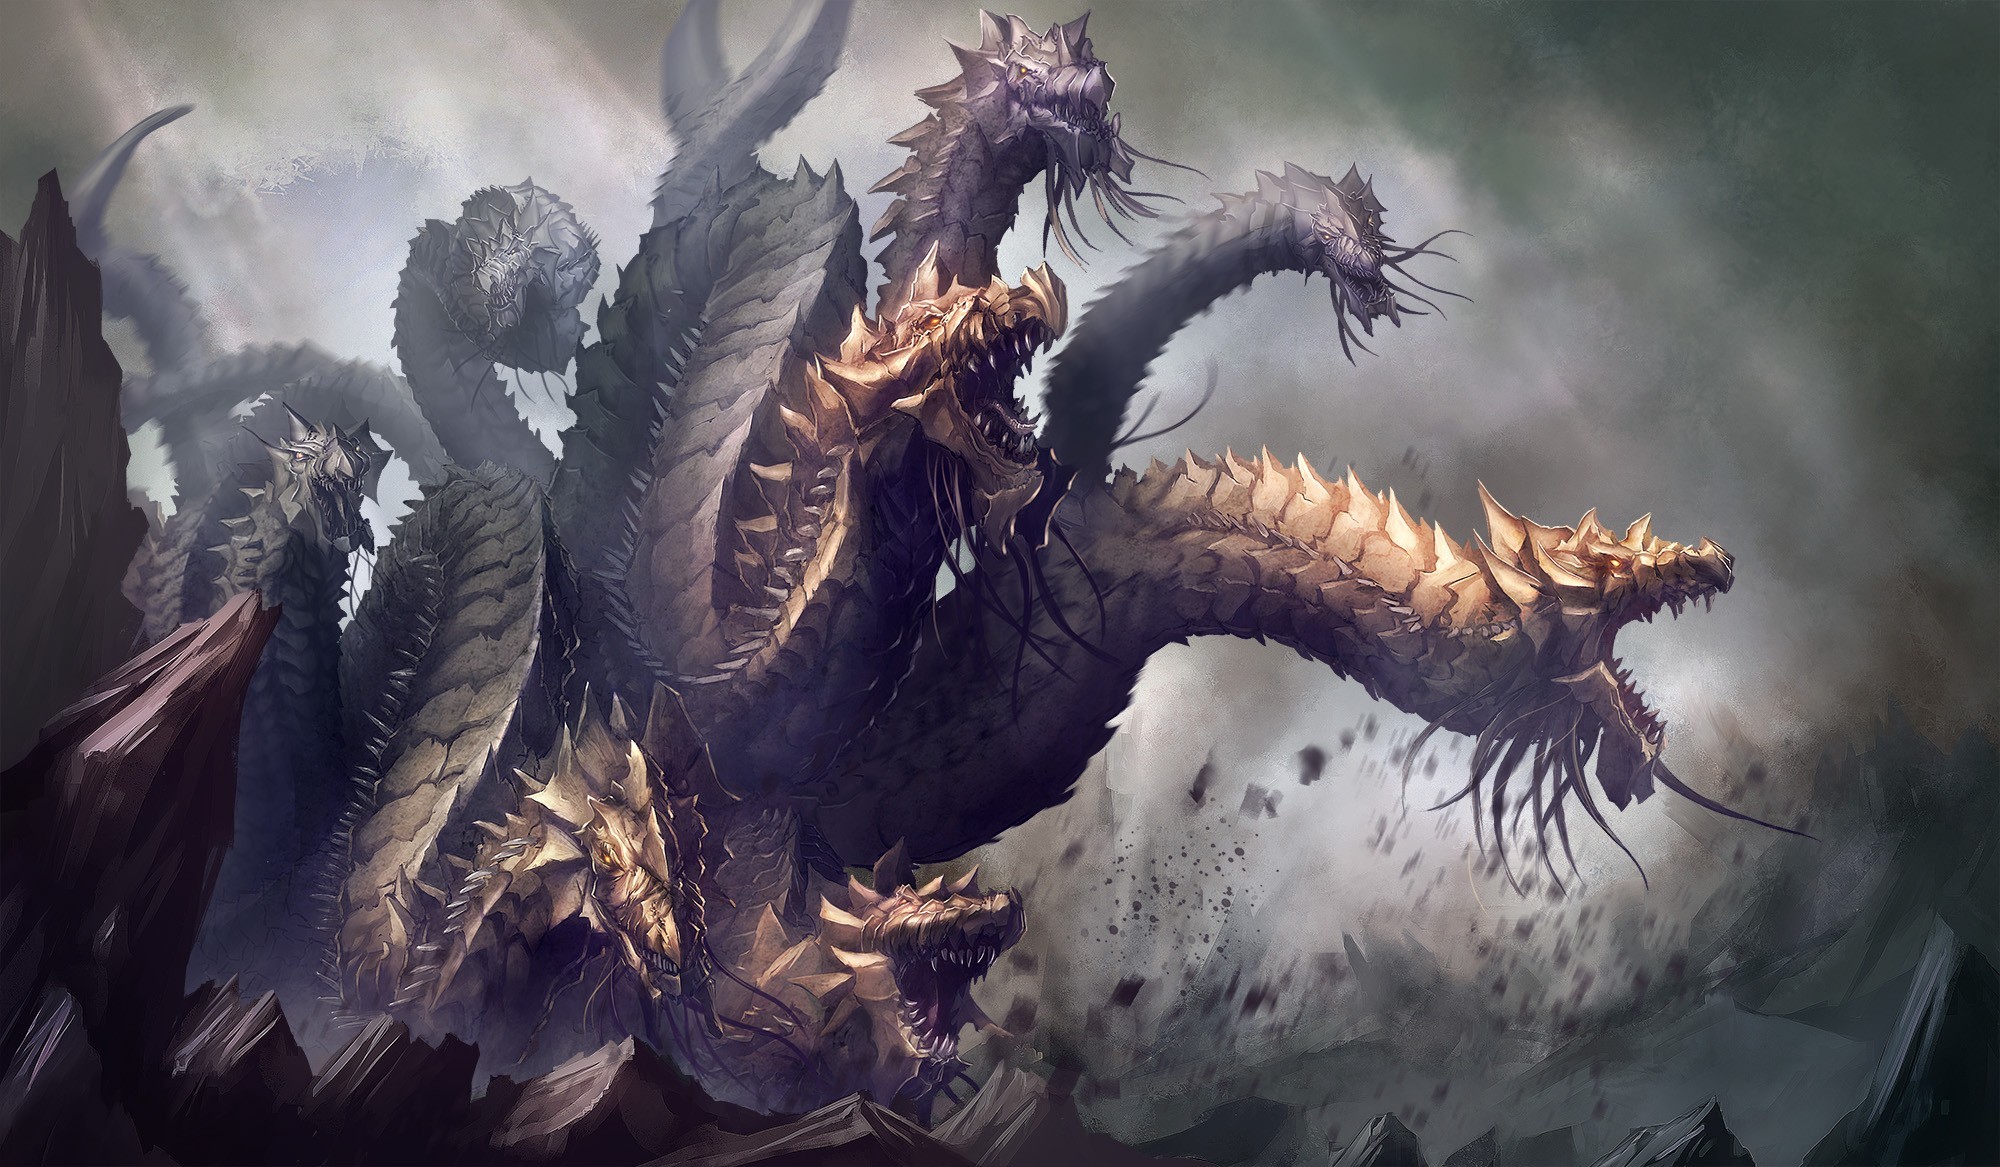 2000x1167 Primordial Hydra Wallpapers High Quality Resolution | Wallpapers 4k |  Pinterest | Wallpaper and Mythical creatures